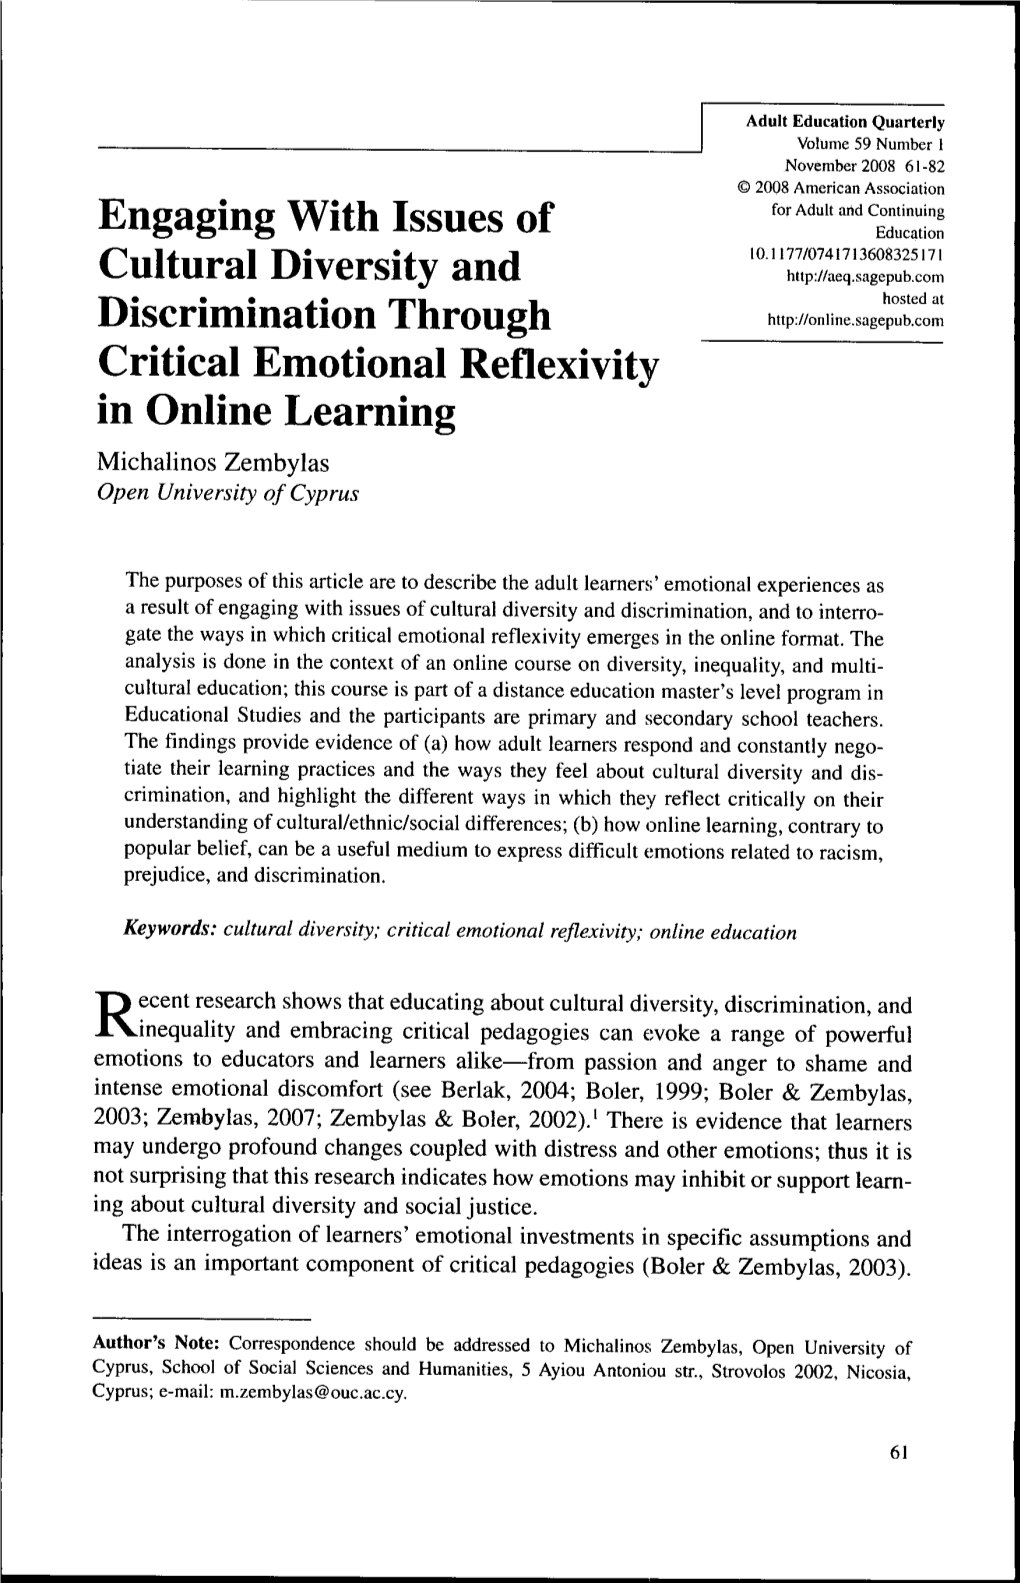 Discrimination Through Critical Emotional Reflexivity in Online Learning